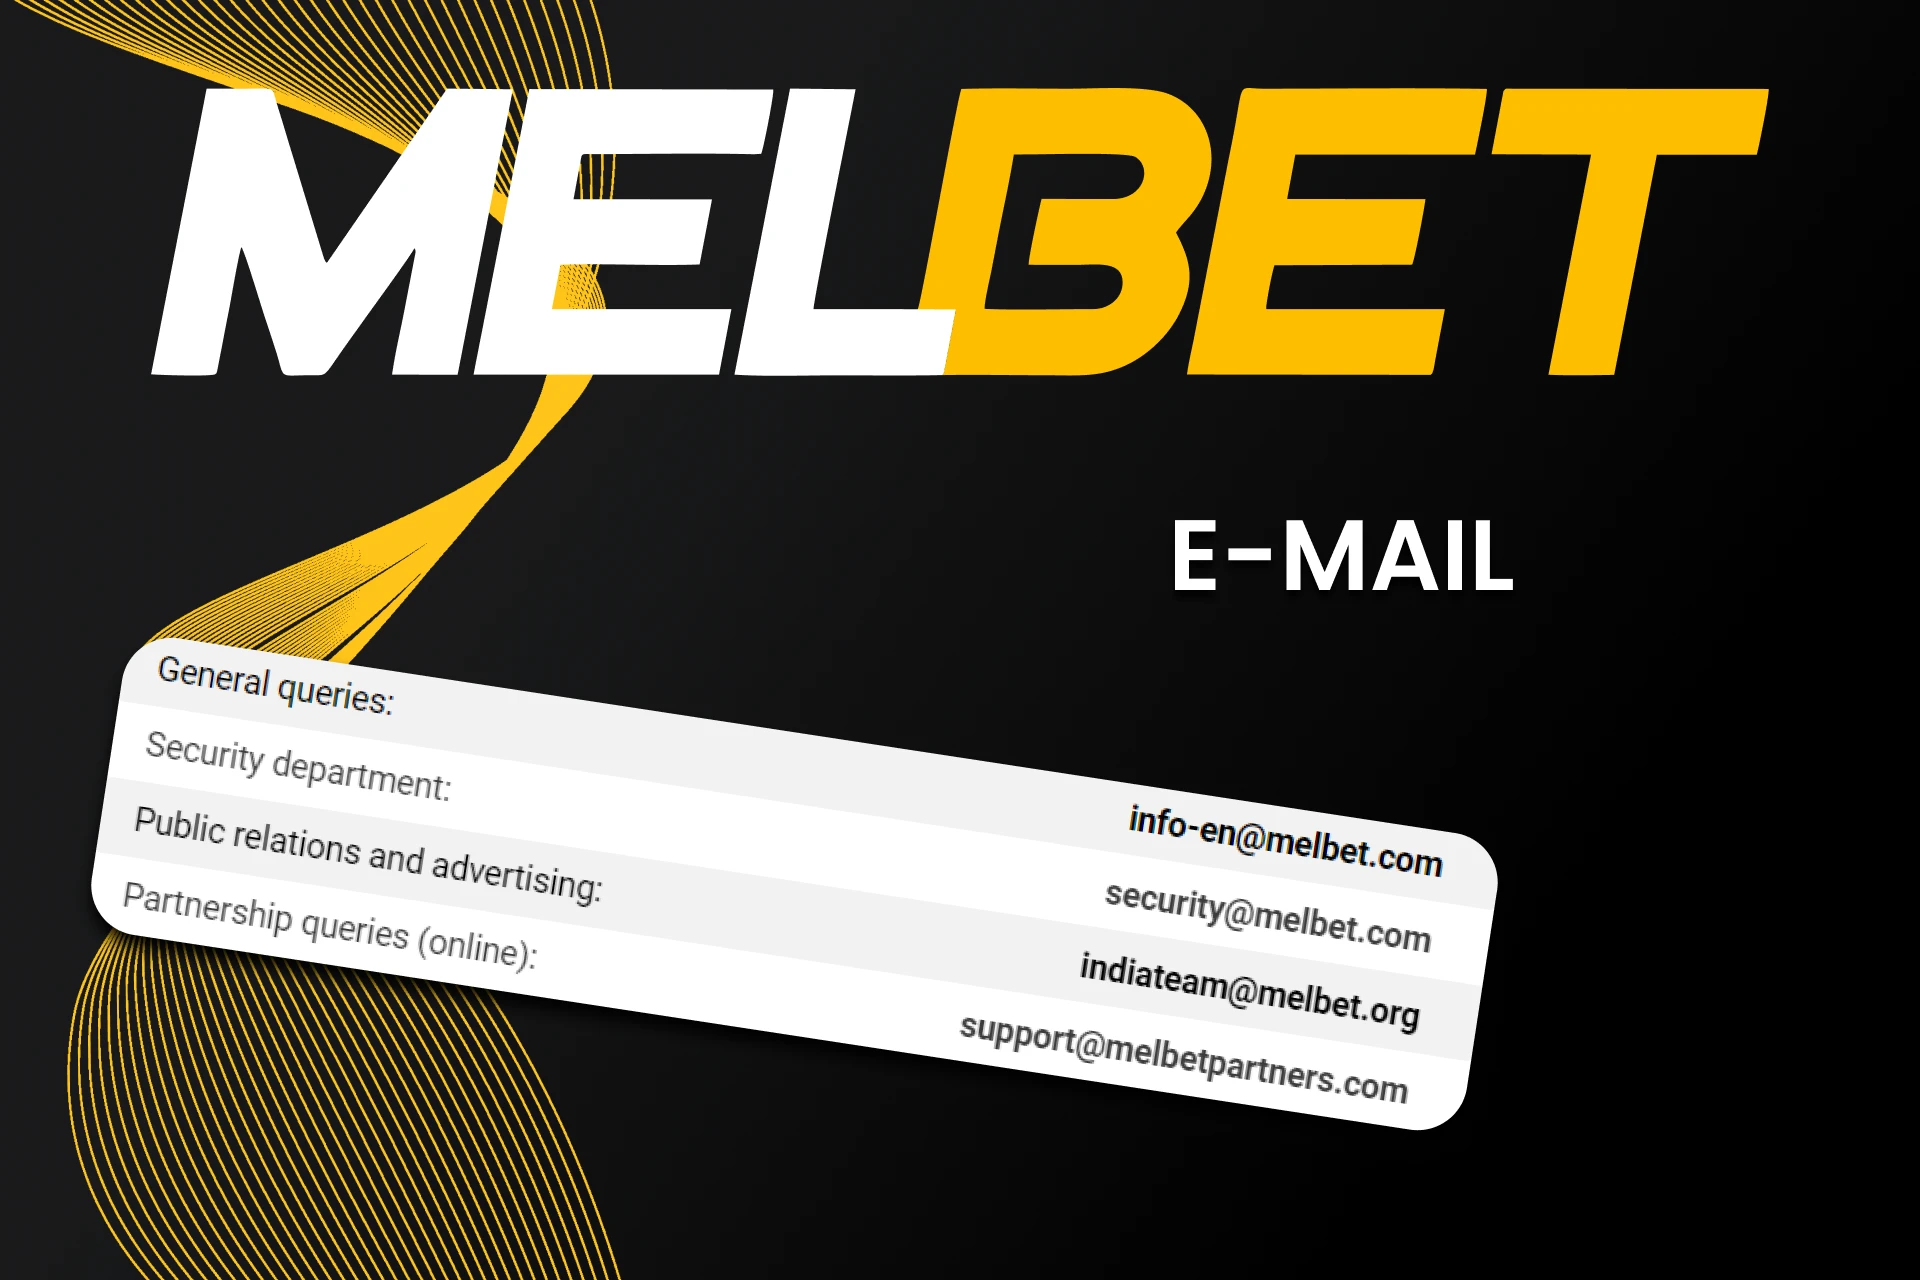 If you have any questions, you can contact the Melbet team via e-mail.